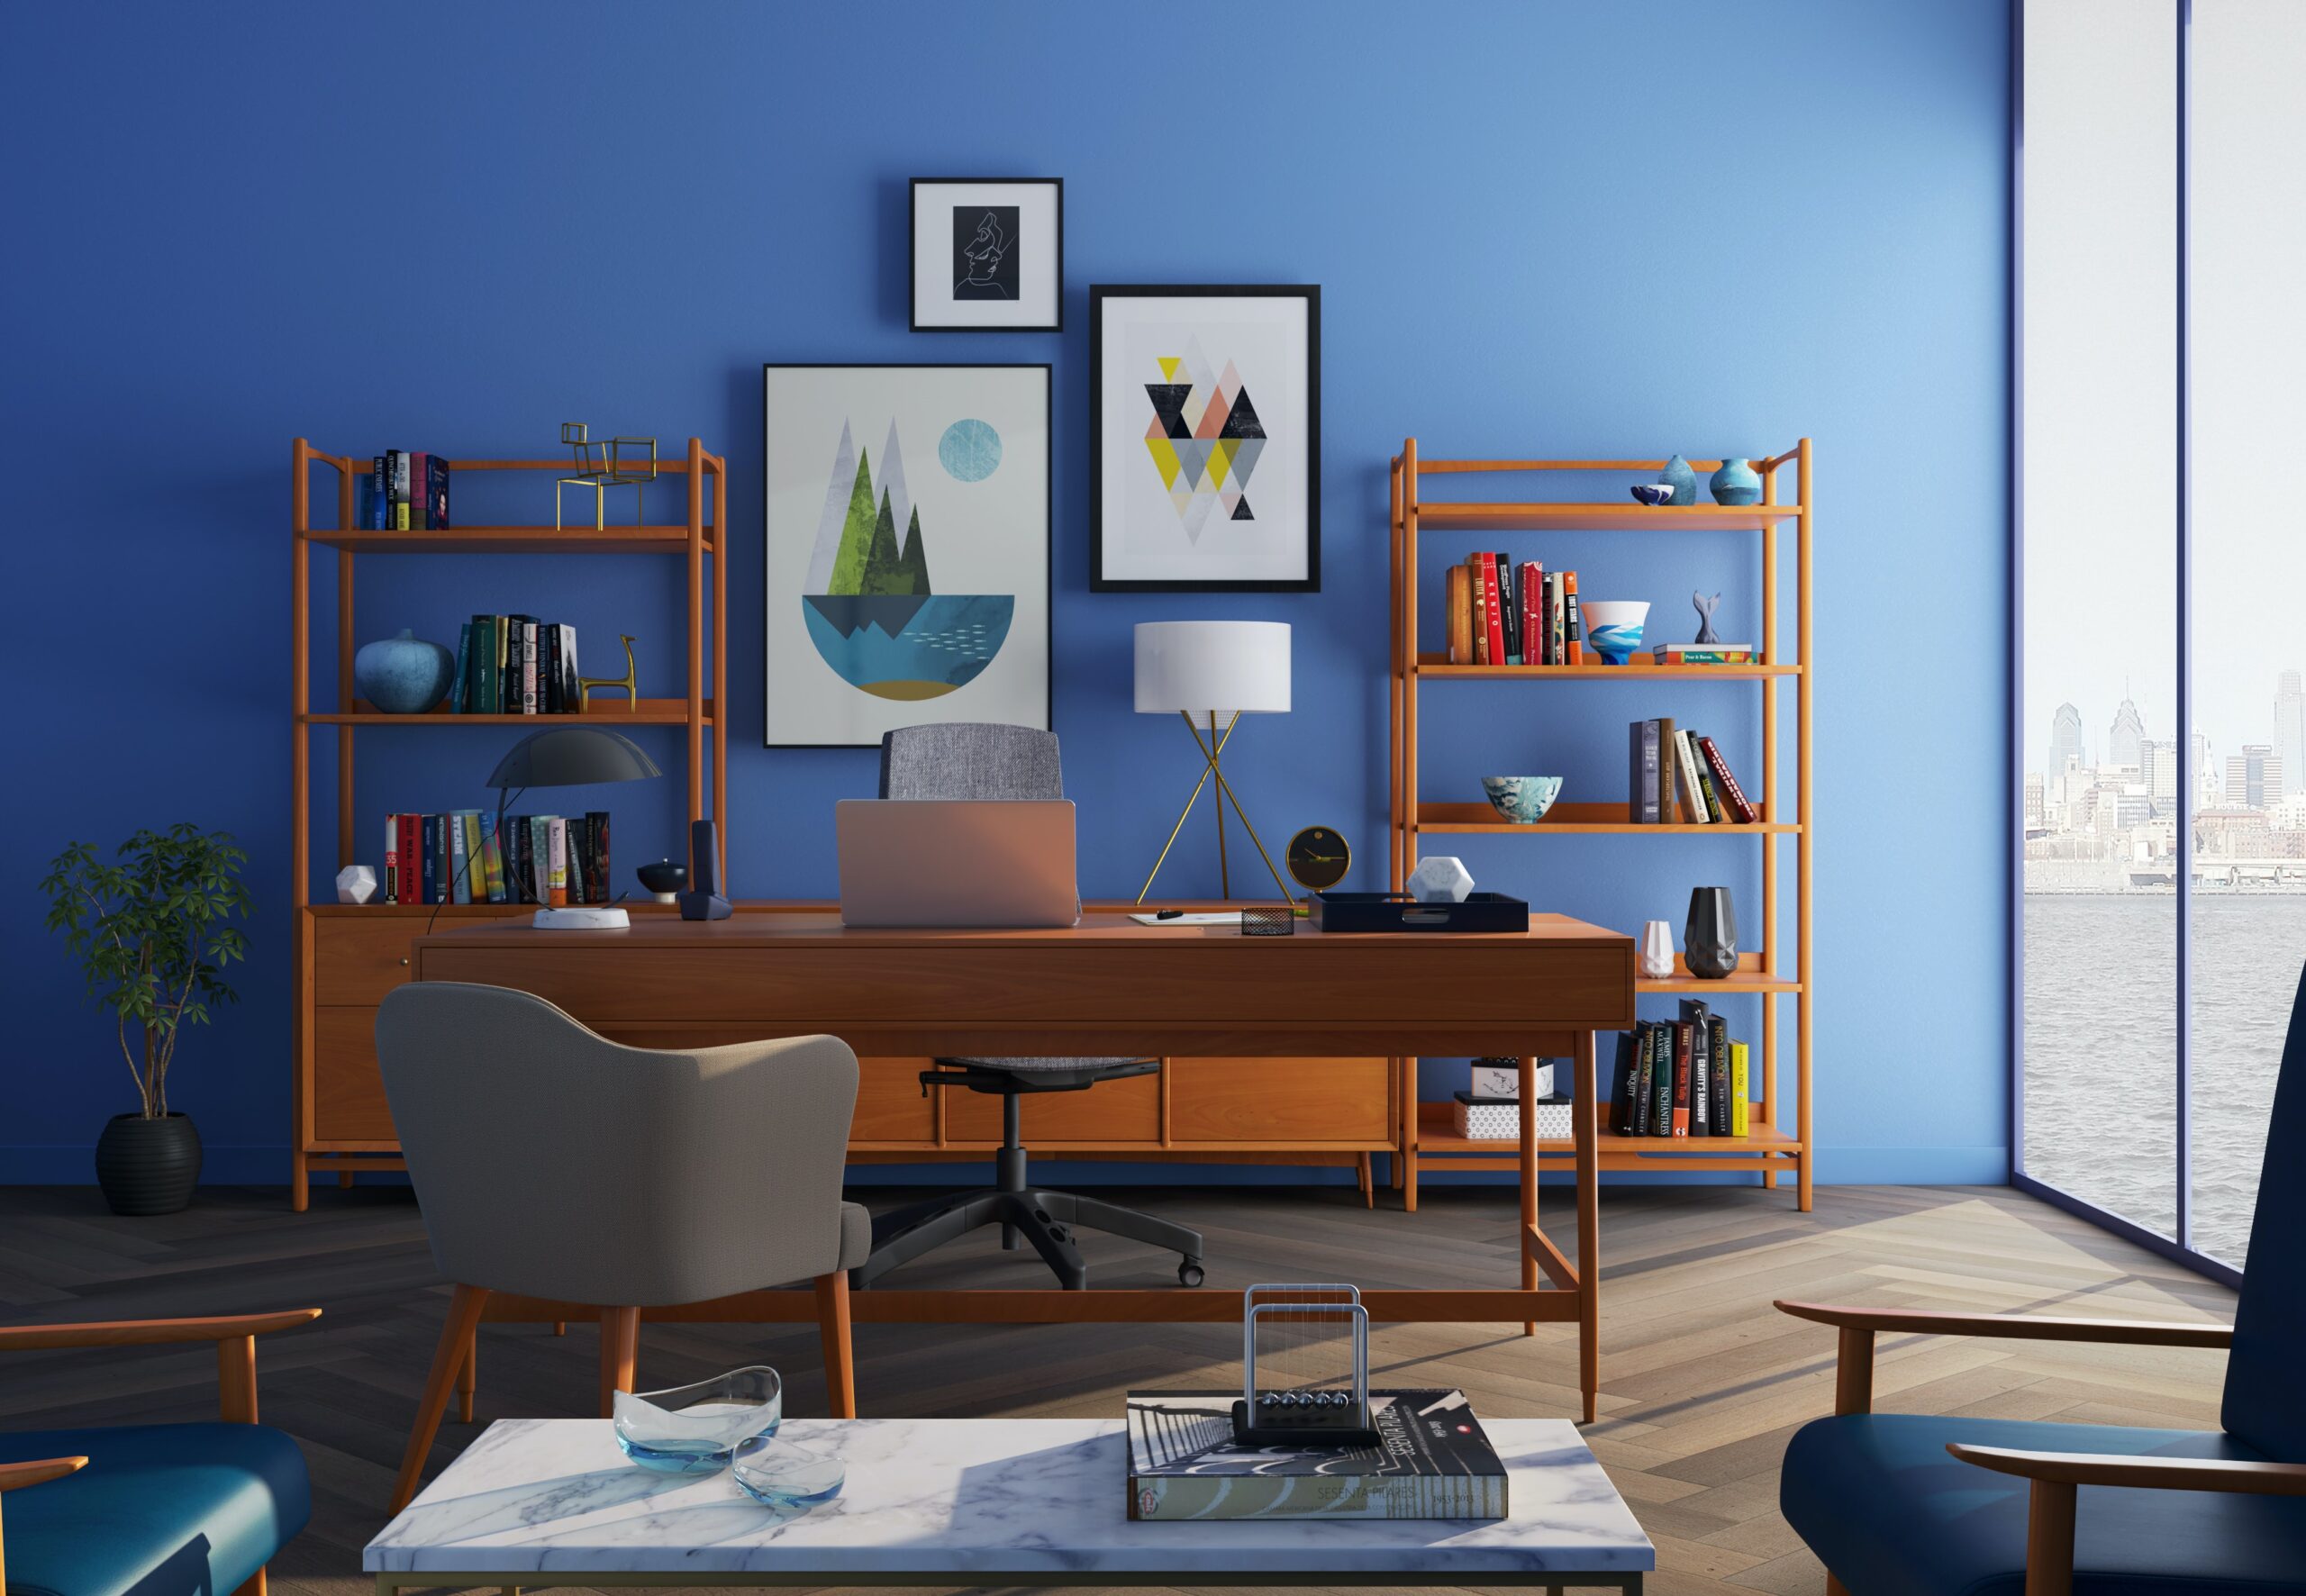 An office room with a blue wall